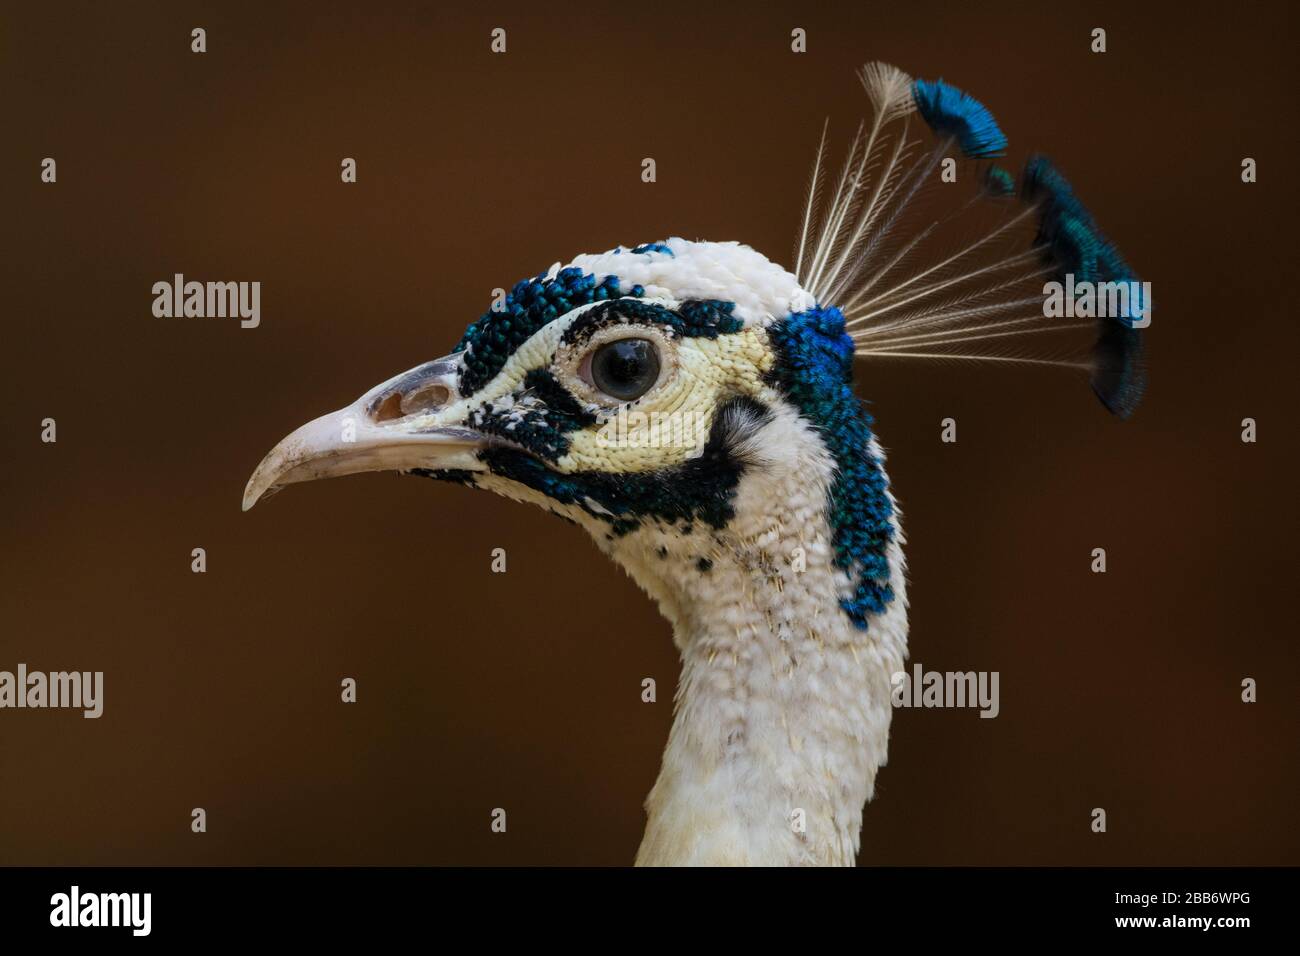 Portrait of a peacock, Indonesia Stock Photo